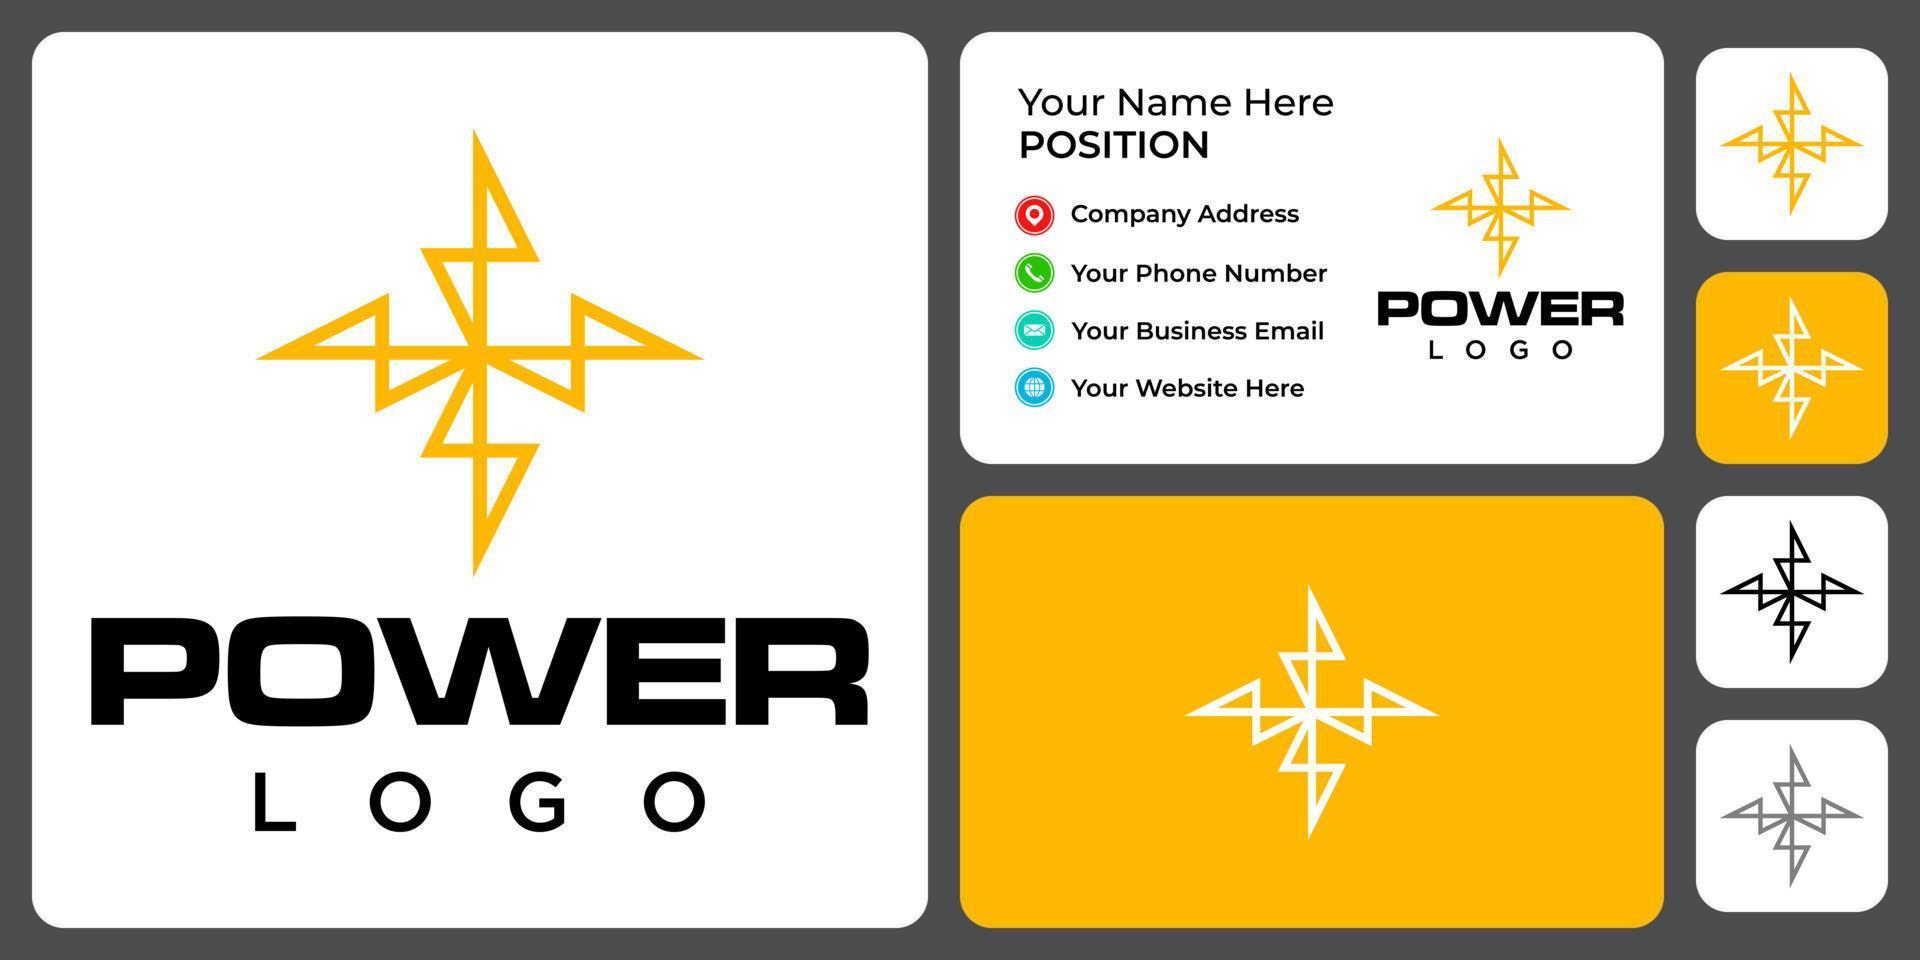 Power electric logo design with business card template. vector